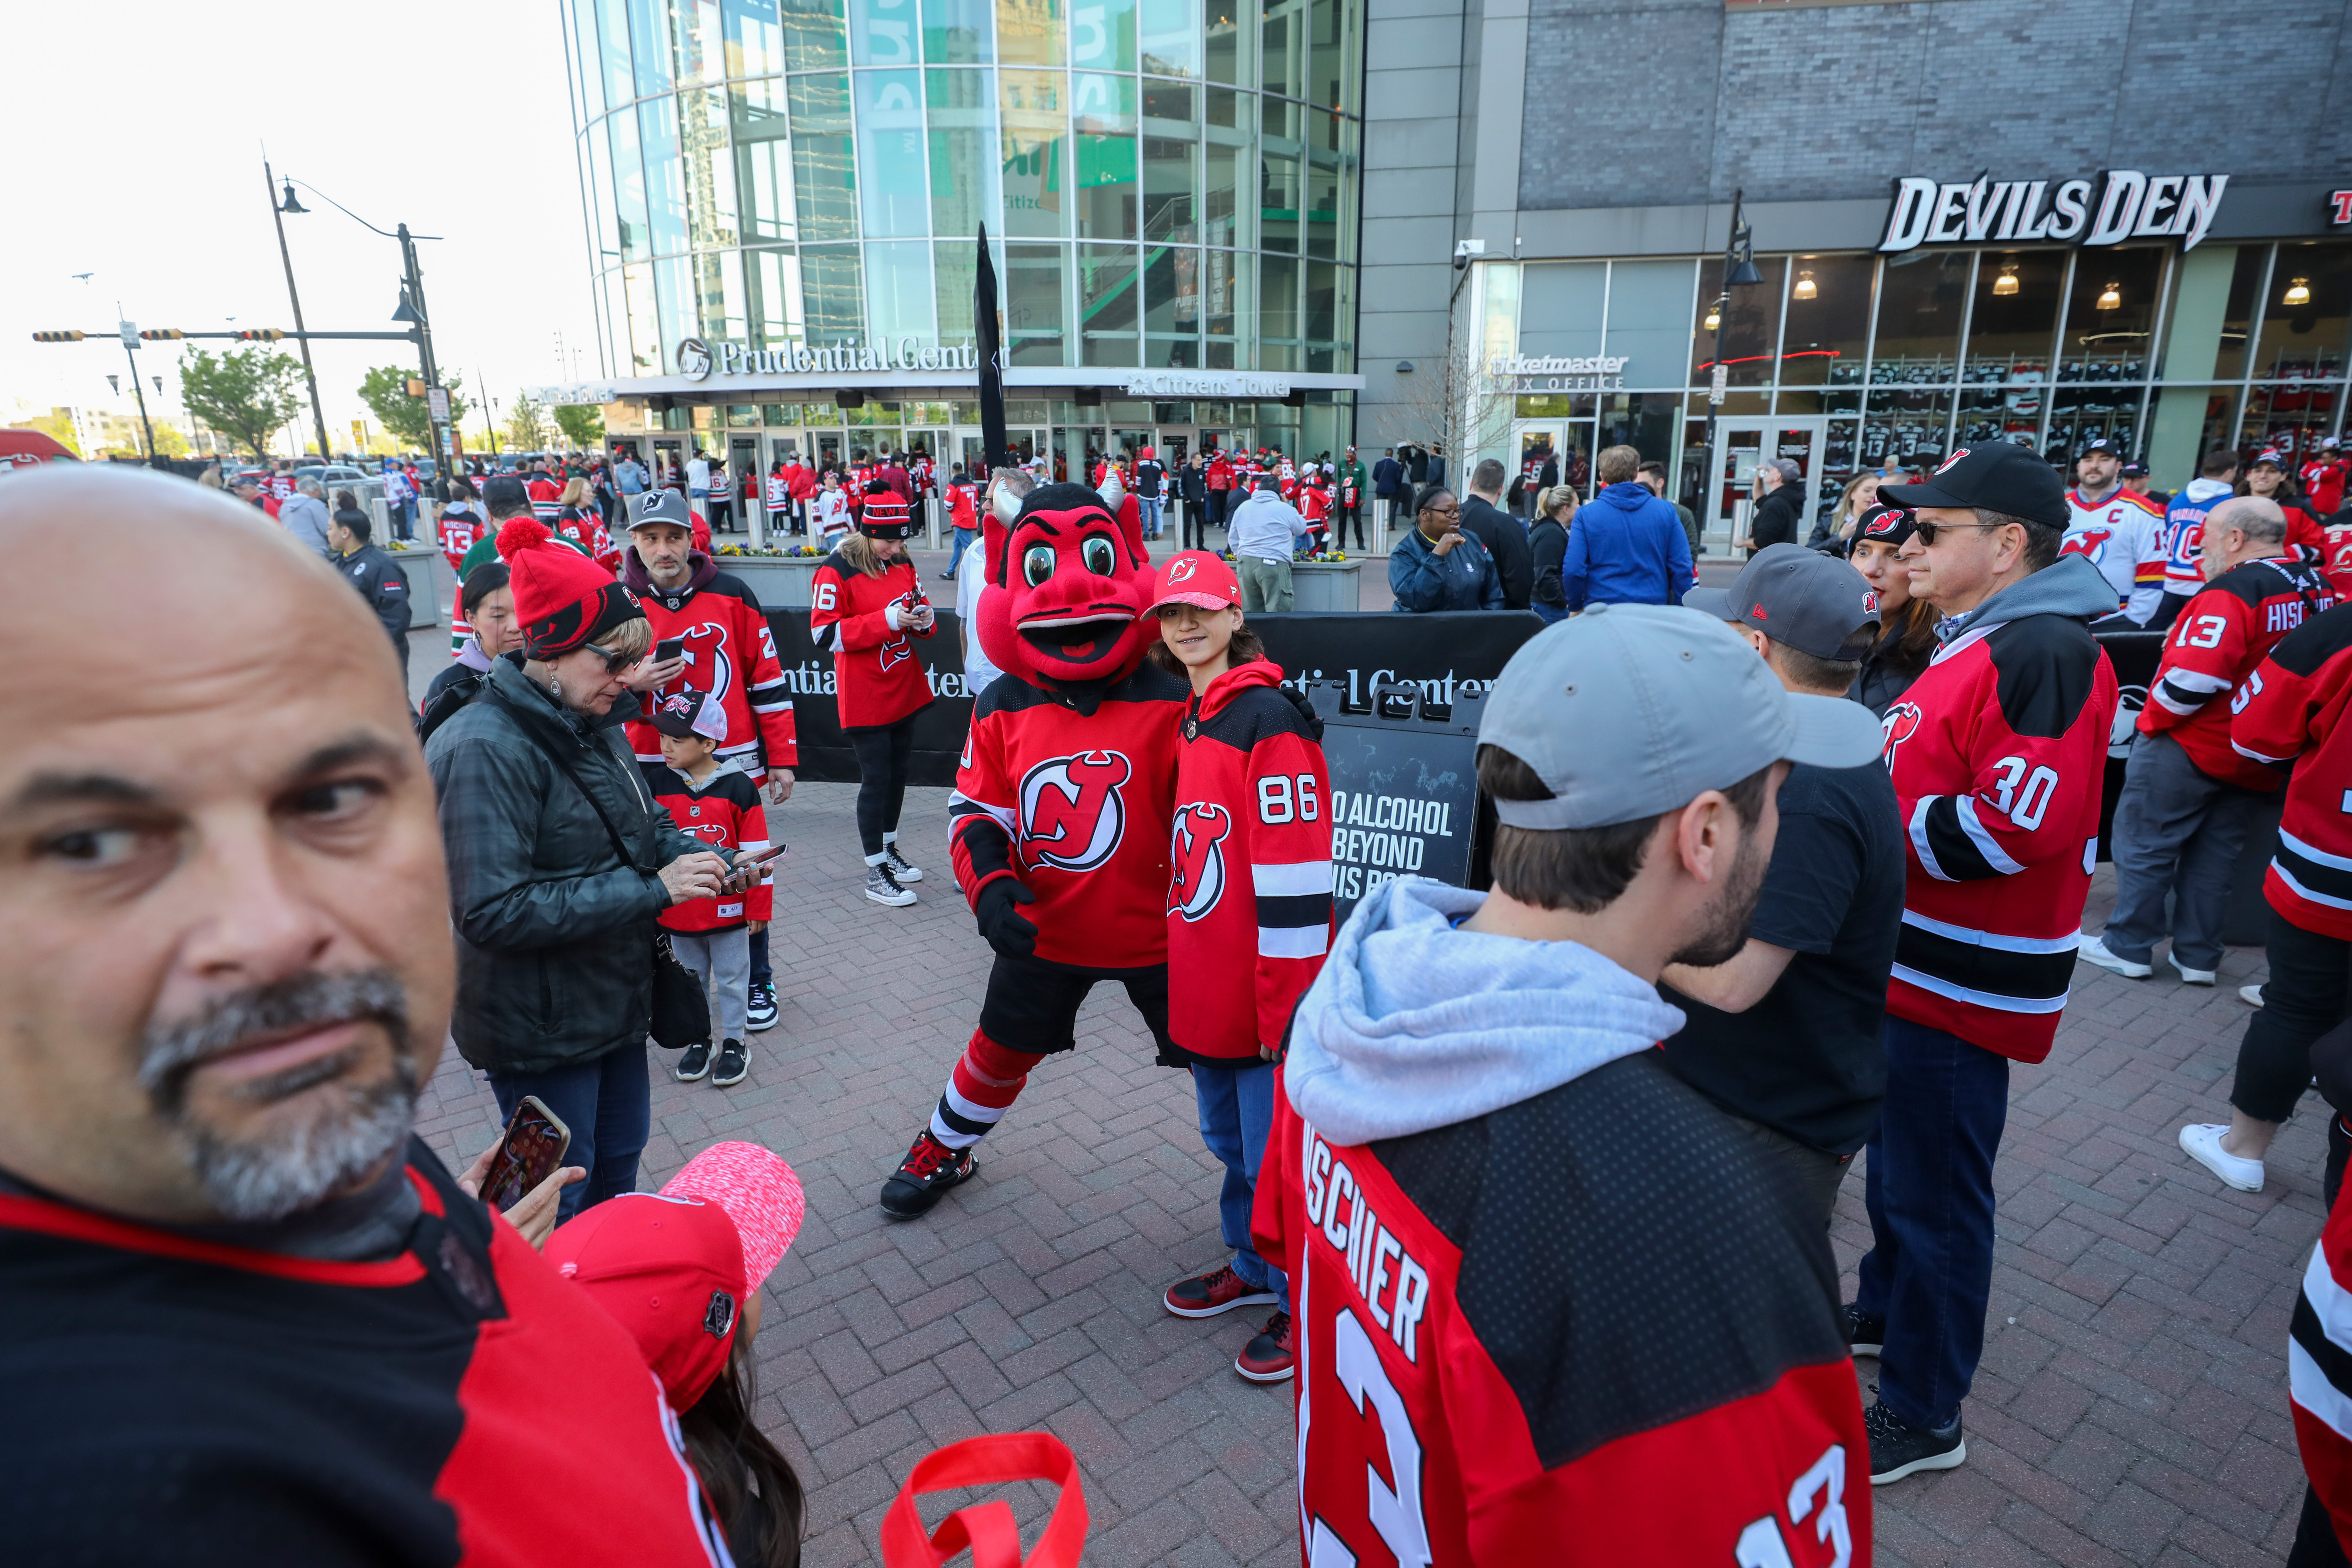 The scene outside Prudential Center before the start of the New Jersey Devils - New York Rangers Stanley Cup playoffs game on Tuesday, April 18, 2023 in Newark, N.J. 